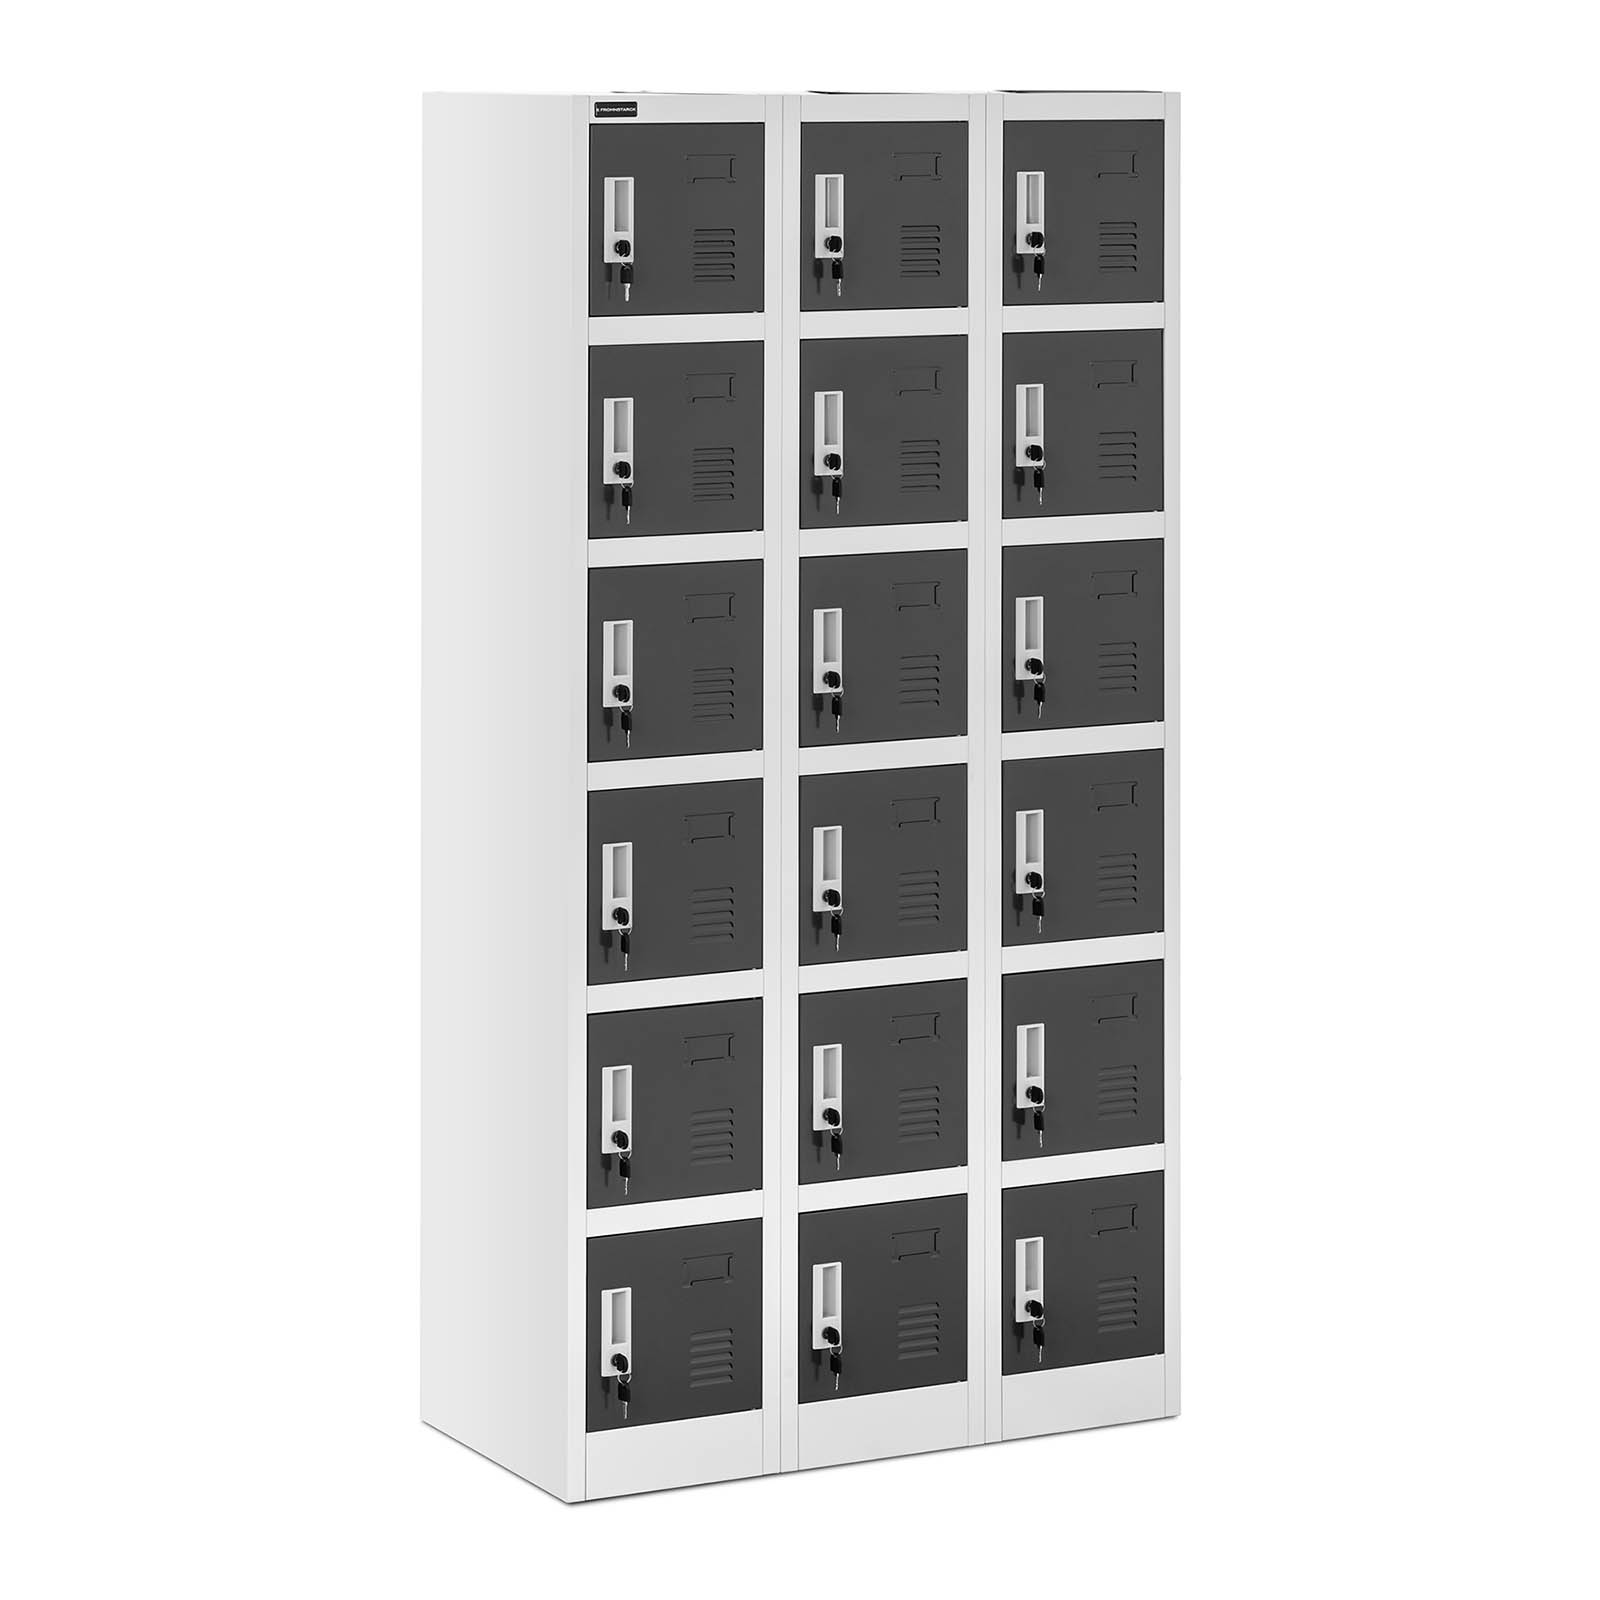 Storage lockers for staff, offices and industry